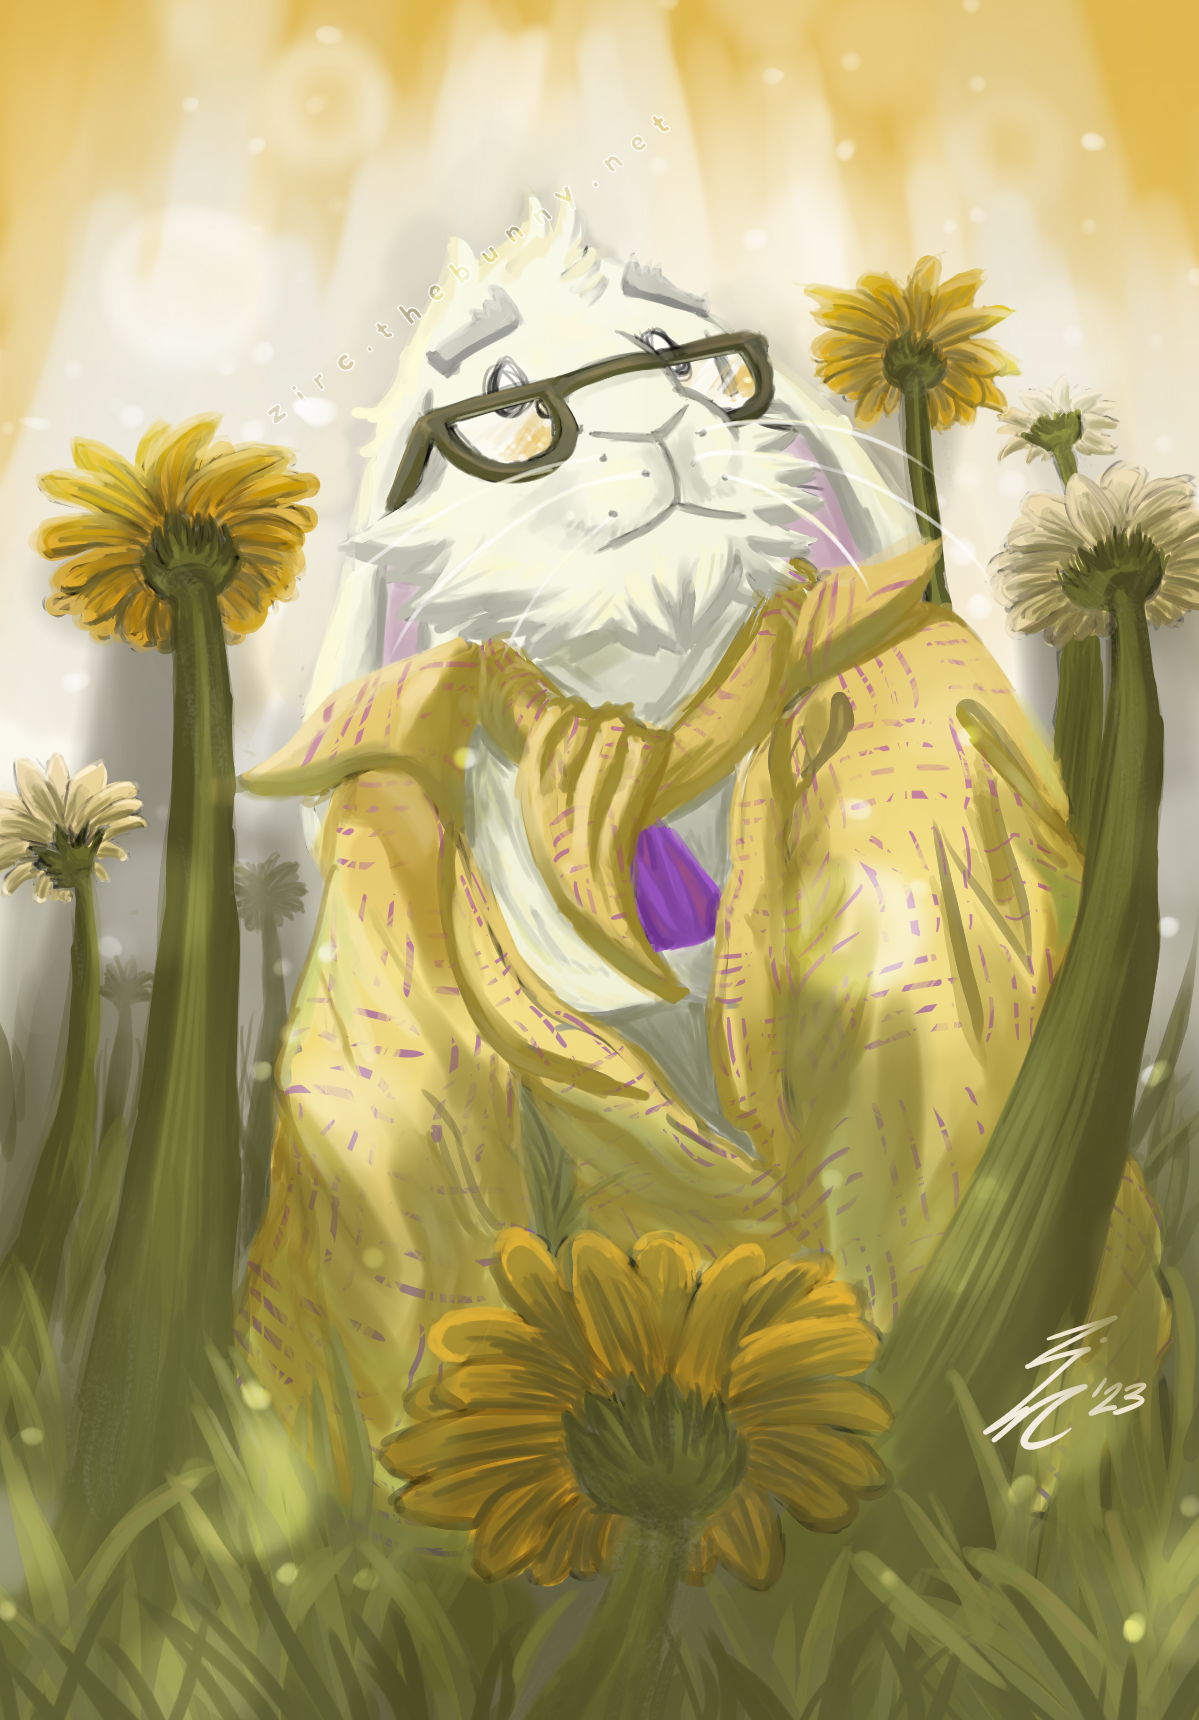 Low-angle perspective painting of an anthro rabbit (Zirc) crouched over some daisies.